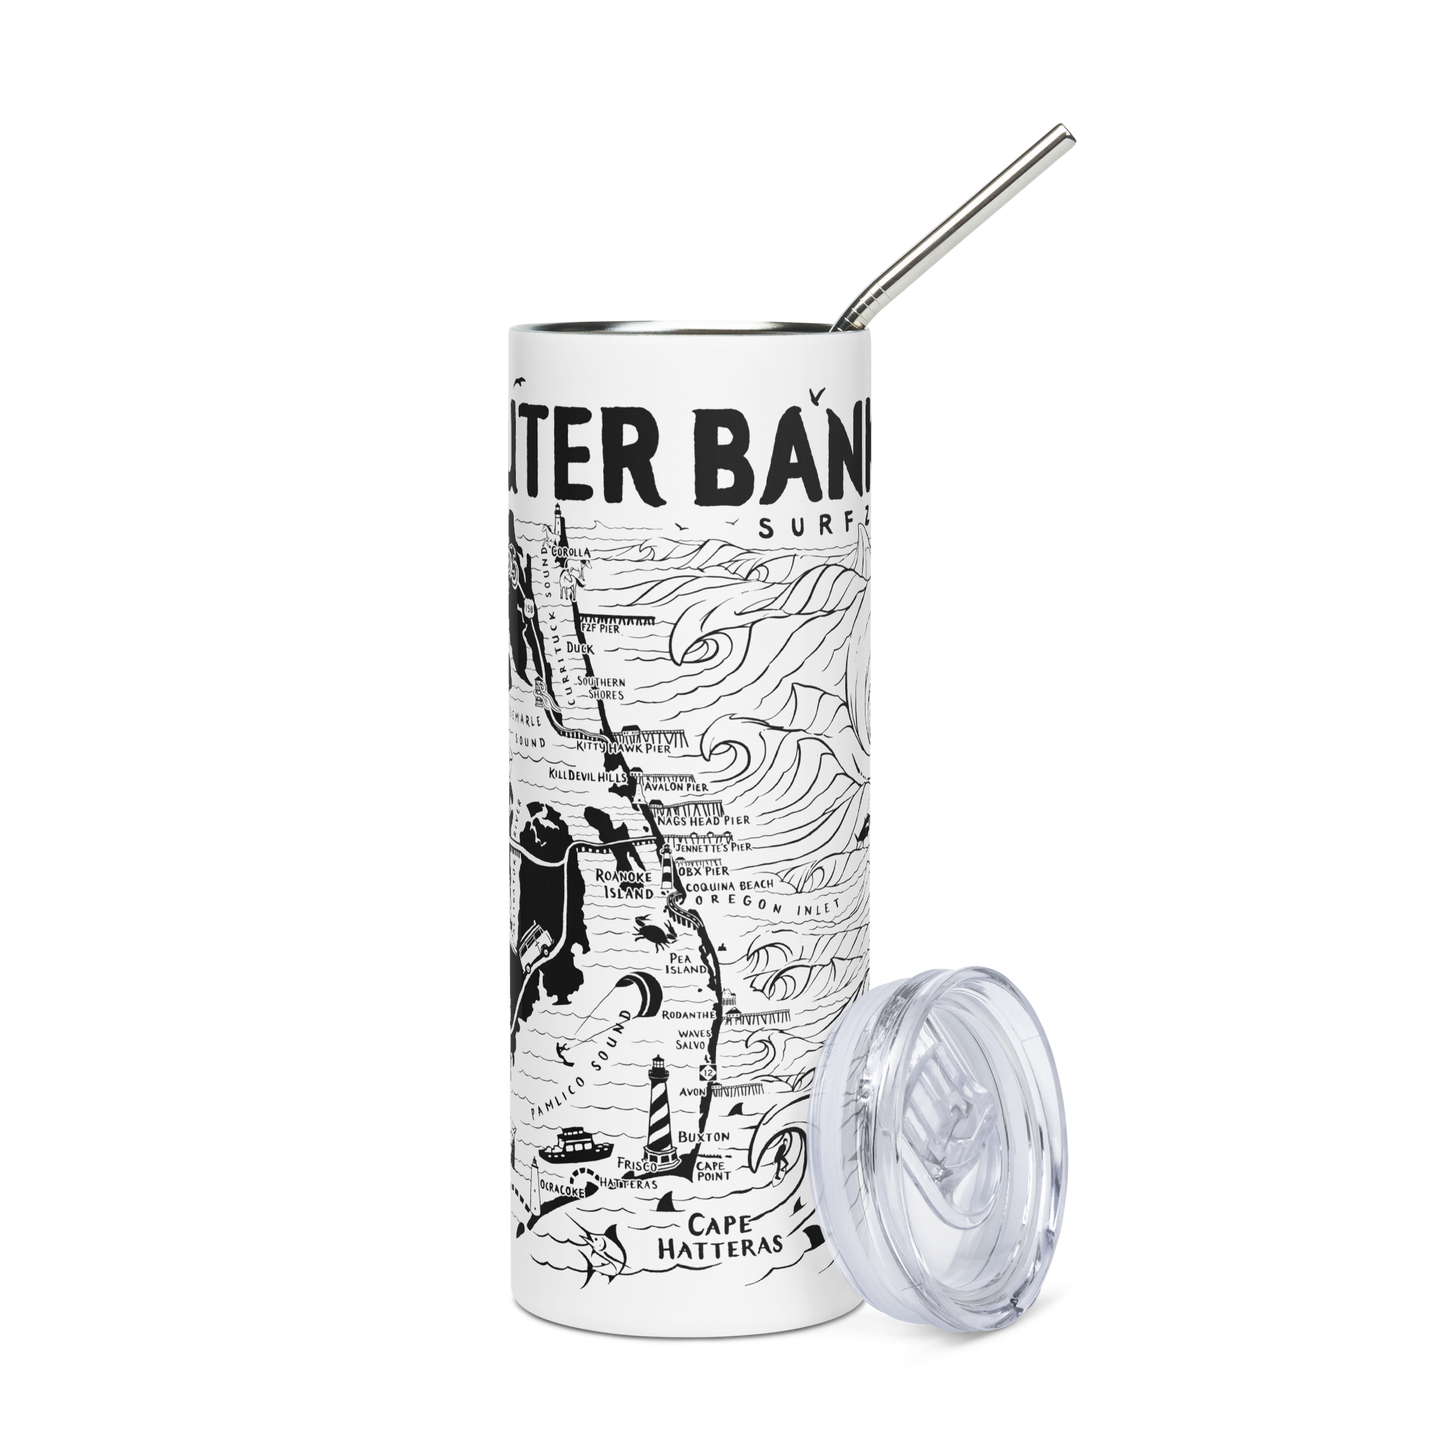 OUTER BANKS Stainless Steel Map Tumbler